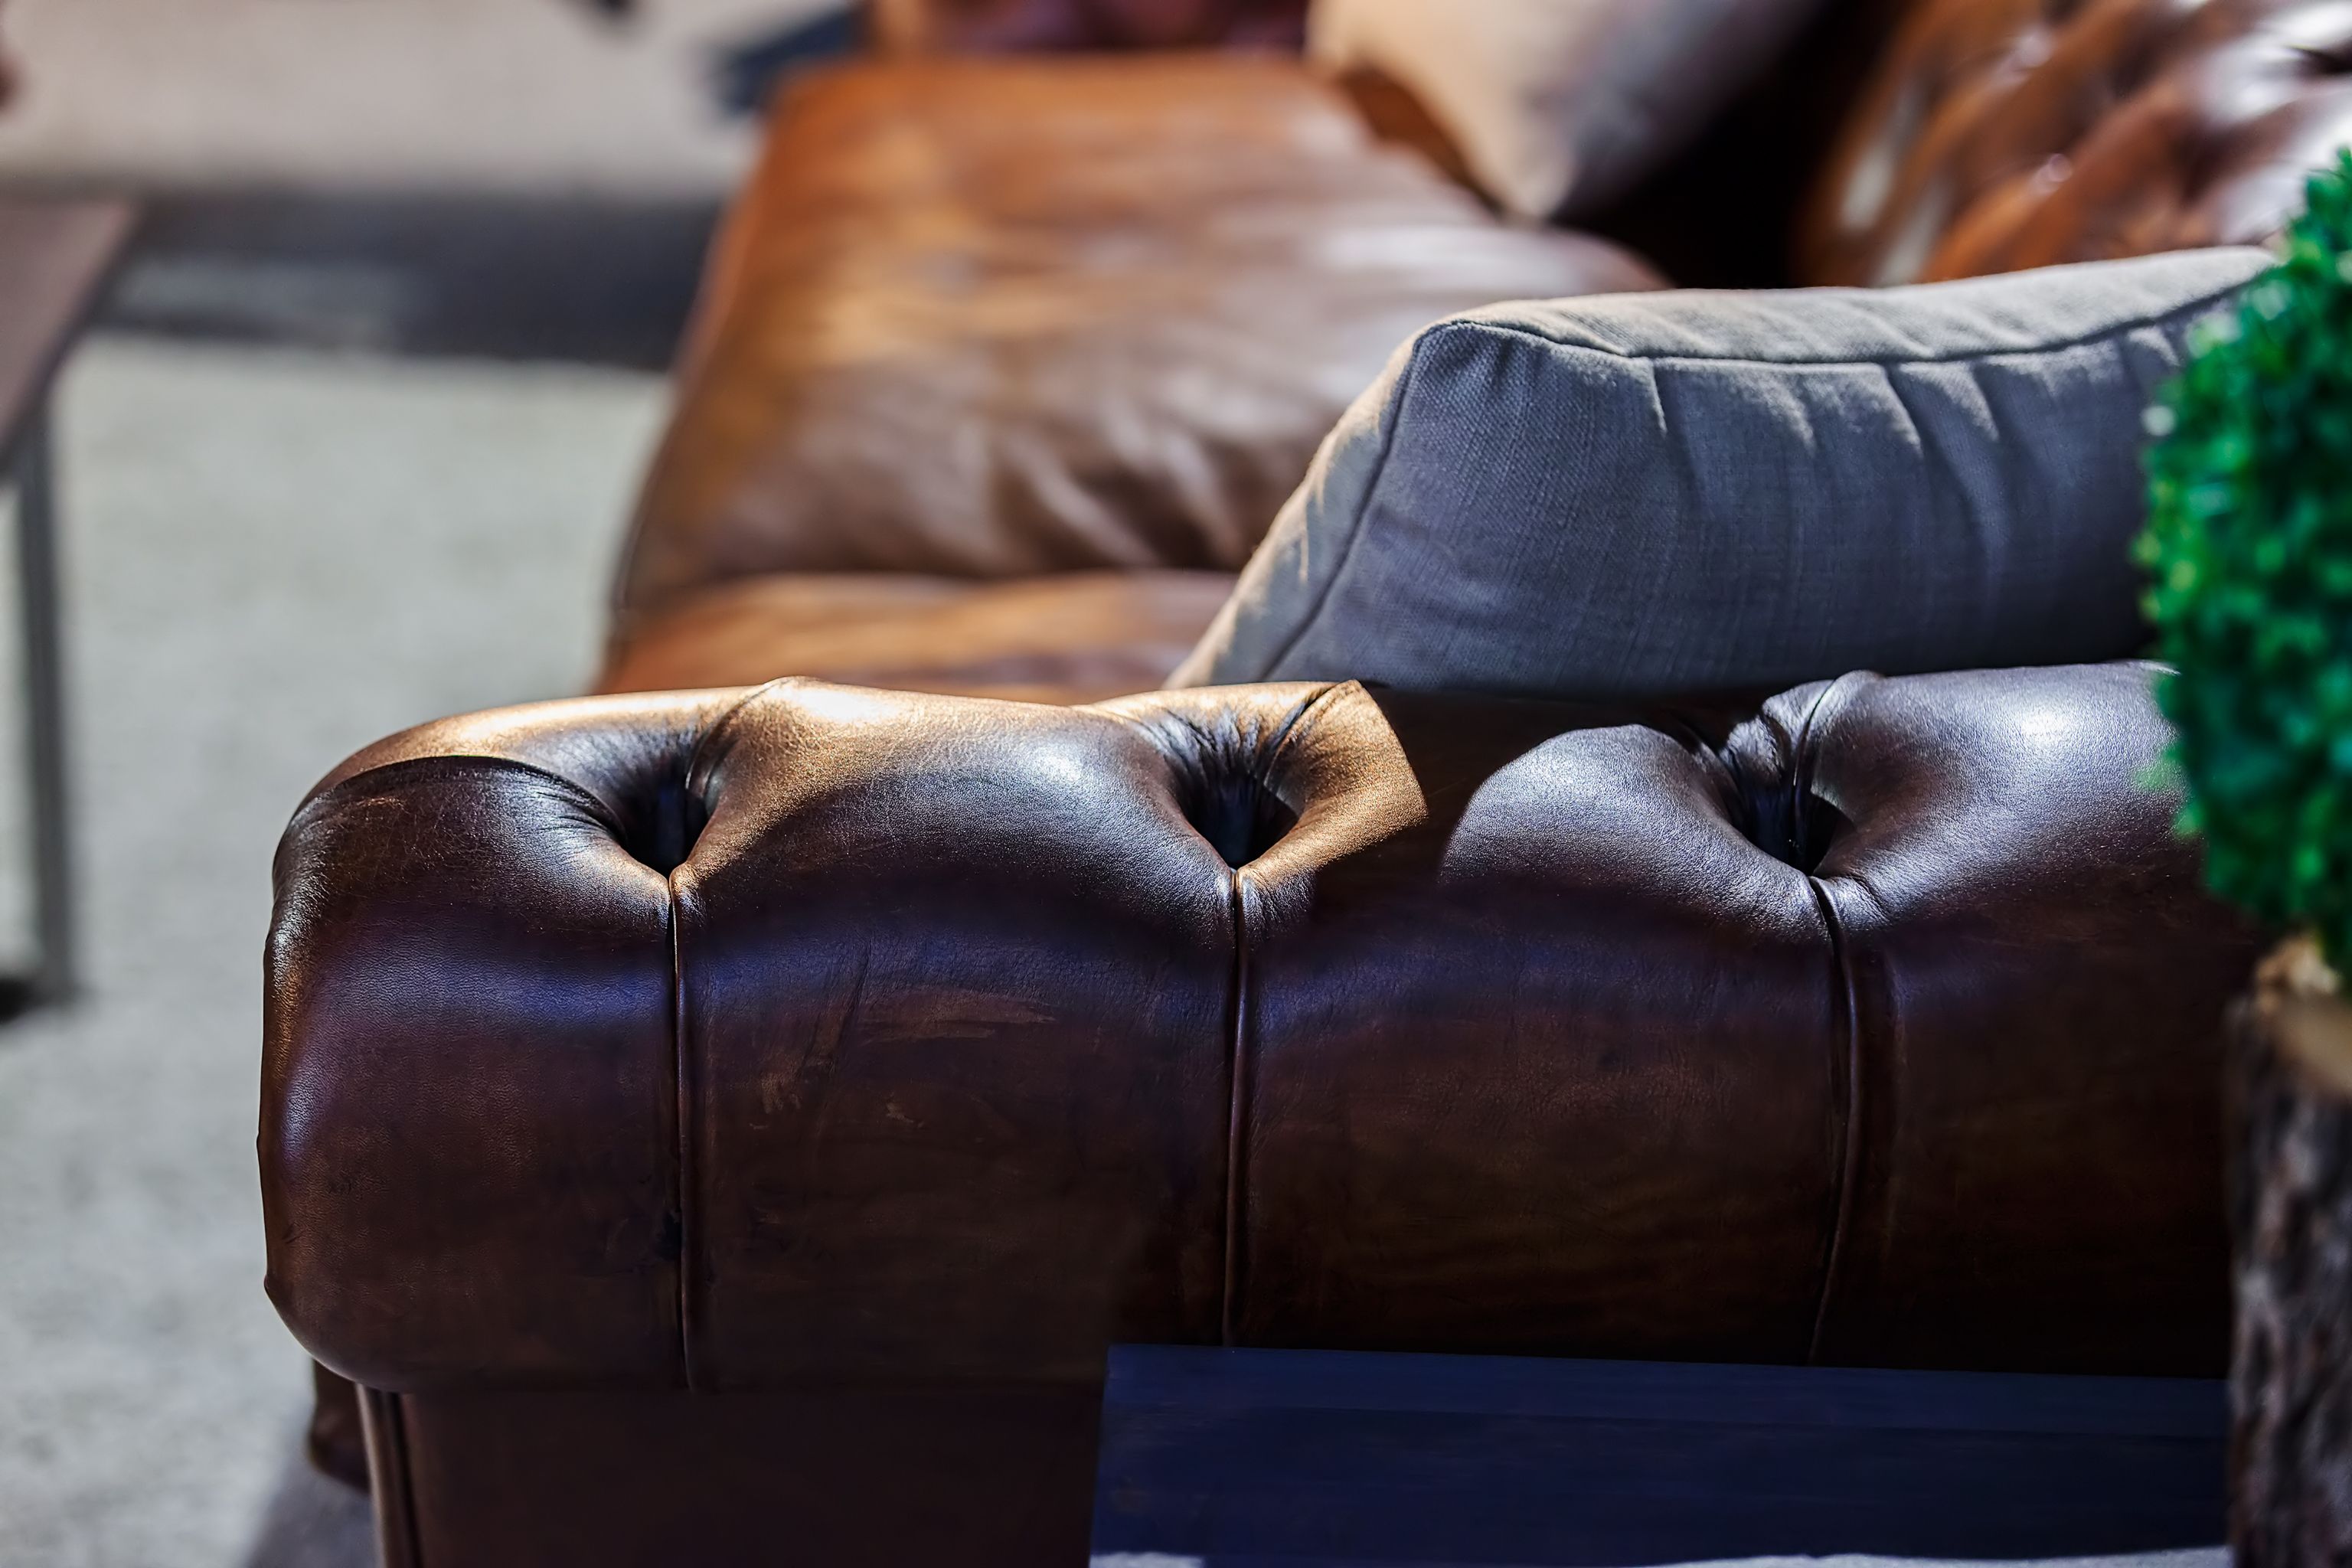 Vintage Leather Sofa Sofas, Retro Leather Couch